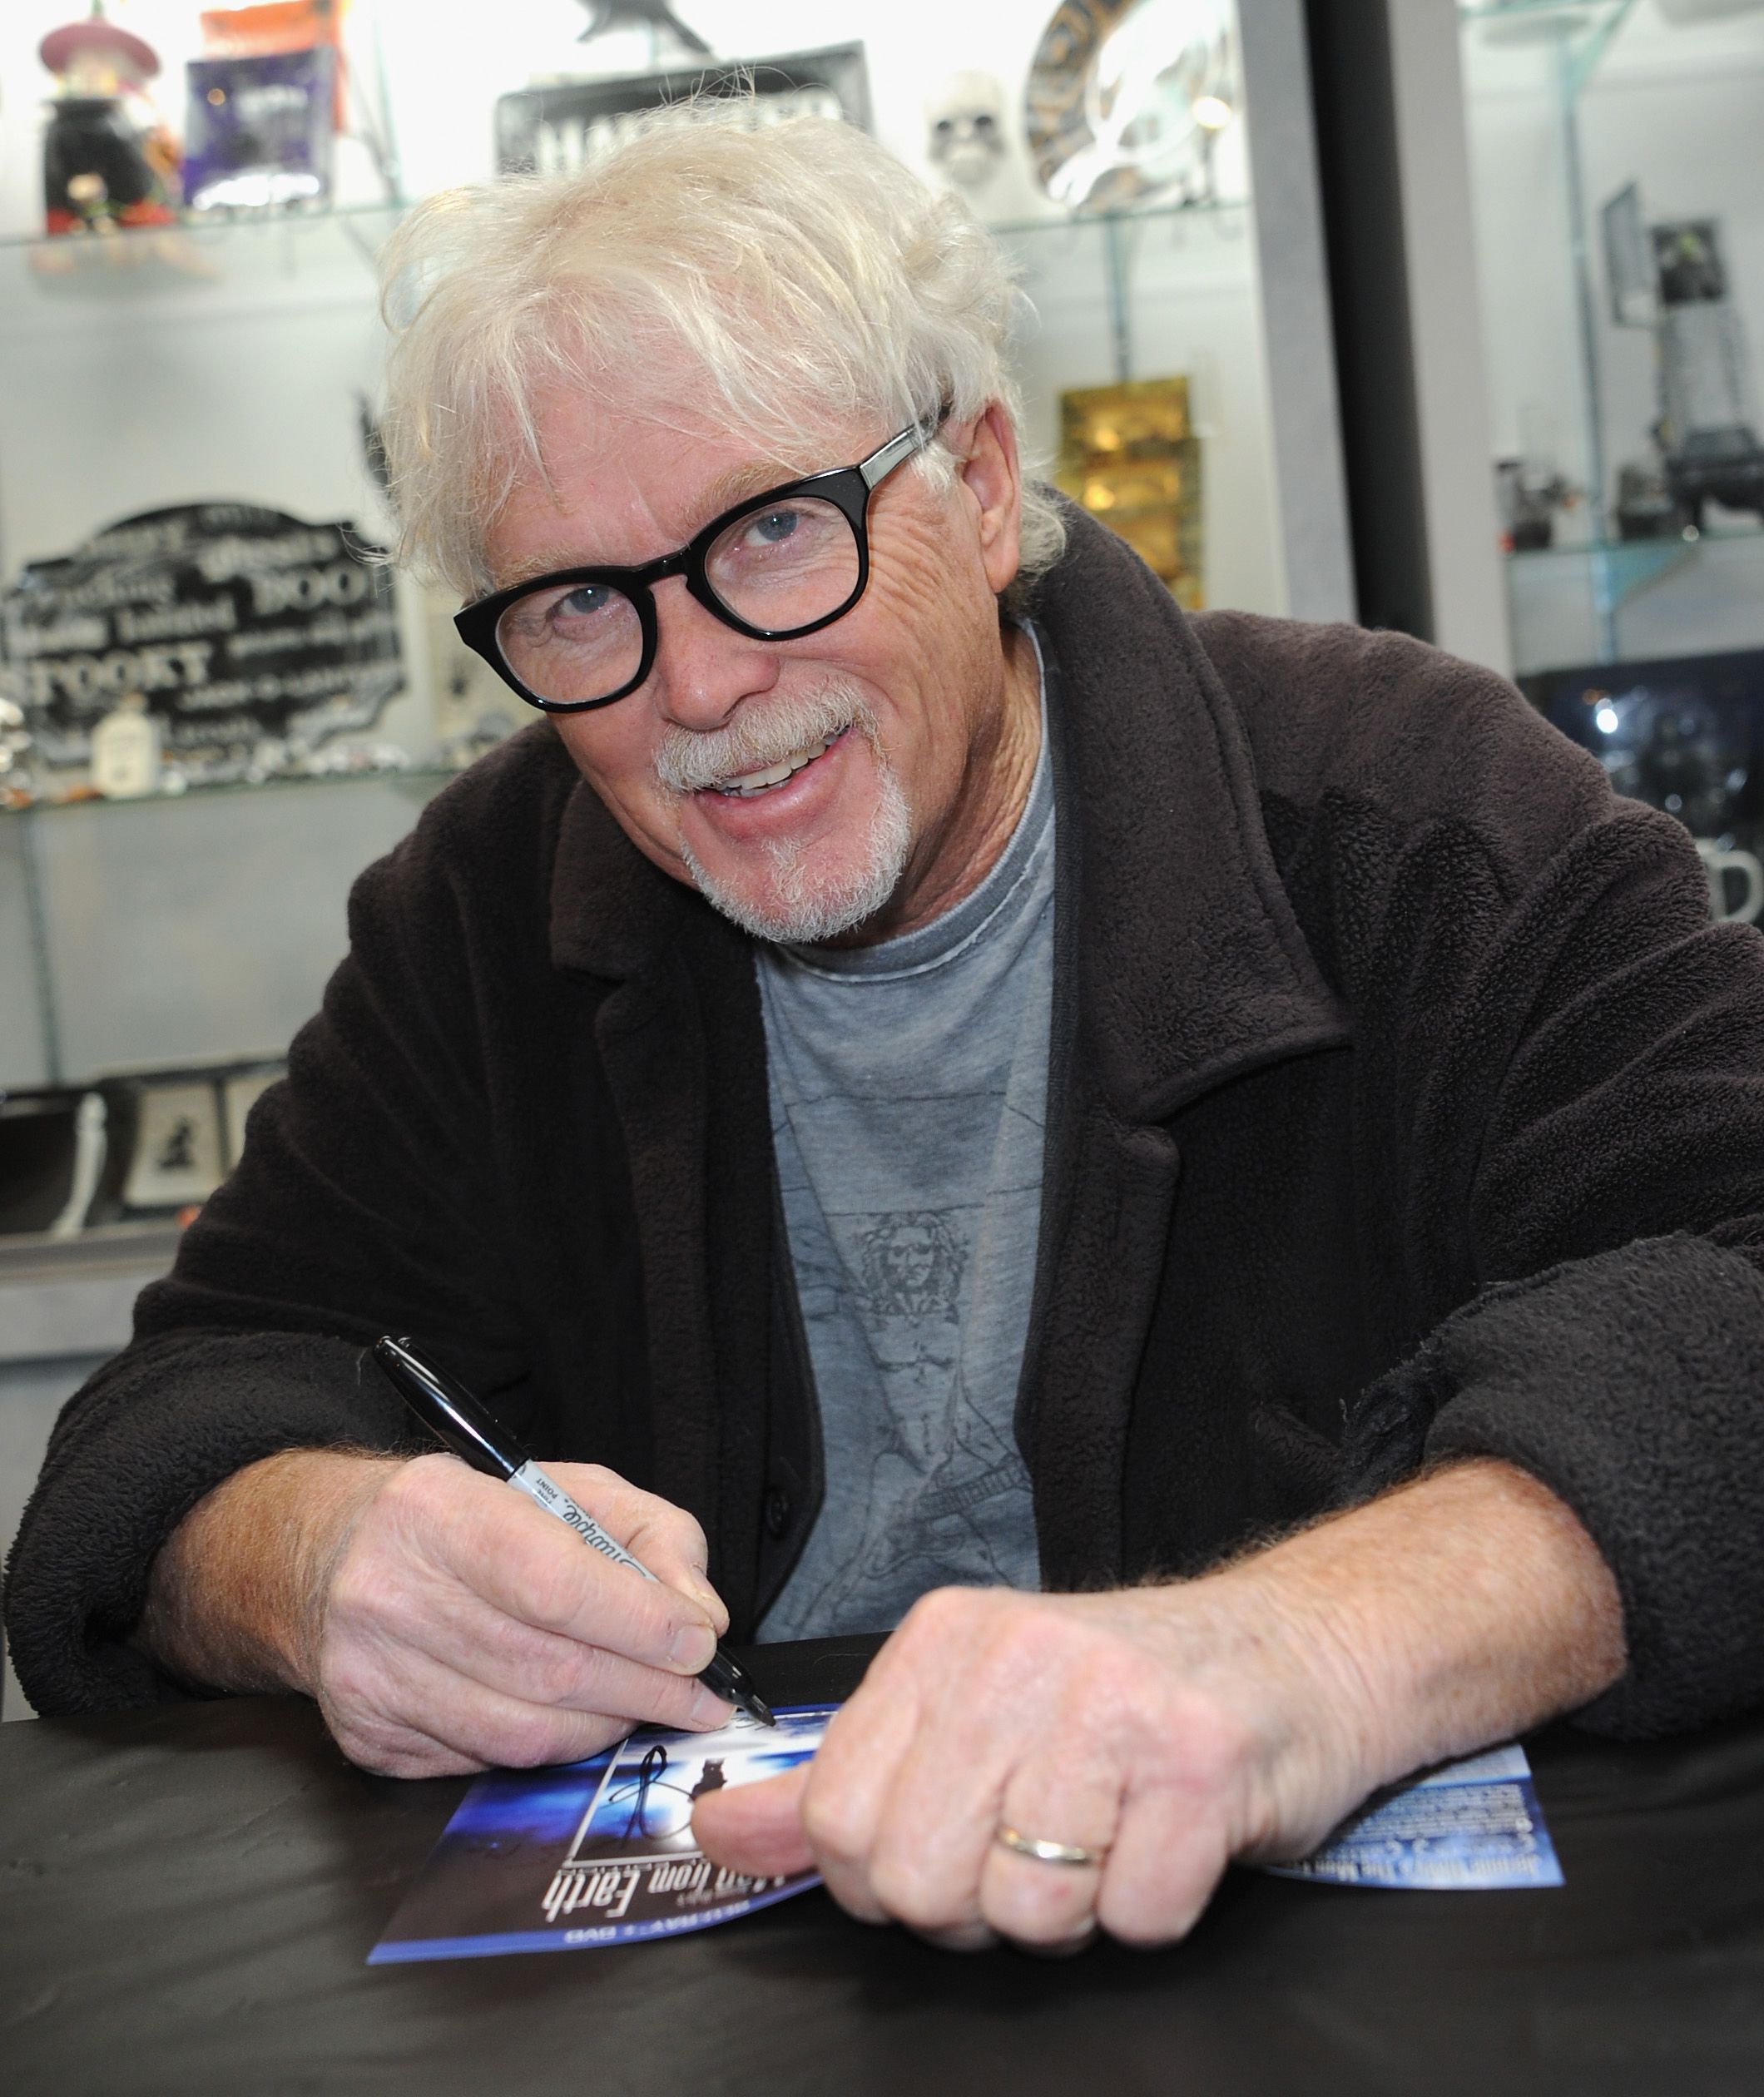 William Katt at The Man From Earth signing held at Dark Delicacies Bookstore on March 7, 2018 in Burbank, California | Photo: Getty Images